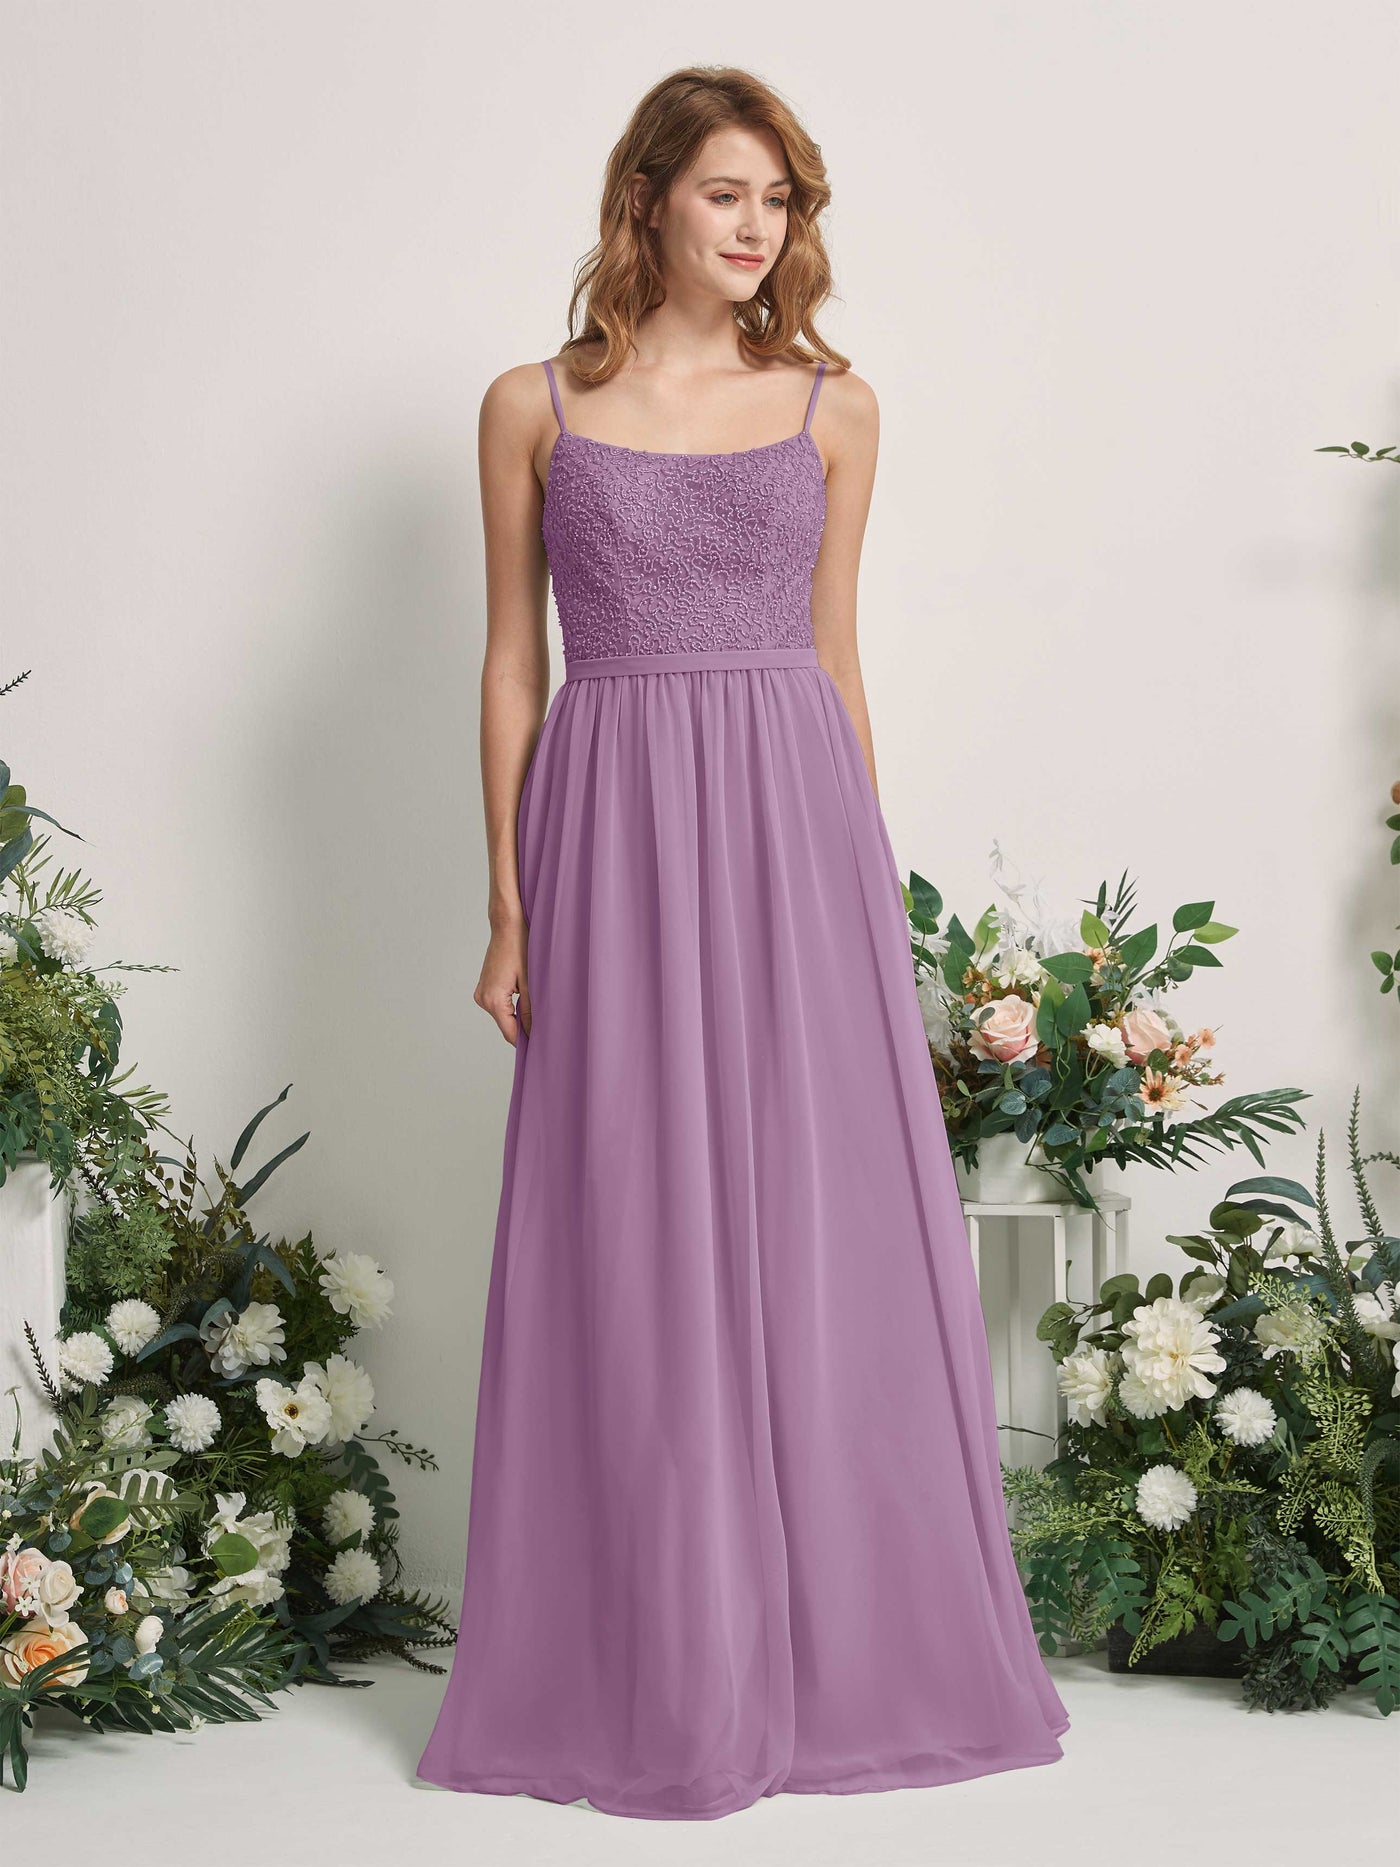 Orchid Mist Bridesmaid Dresses A-line Open back Spaghetti-straps Sleeveless Dresses (83220121)#color_orchid-mist